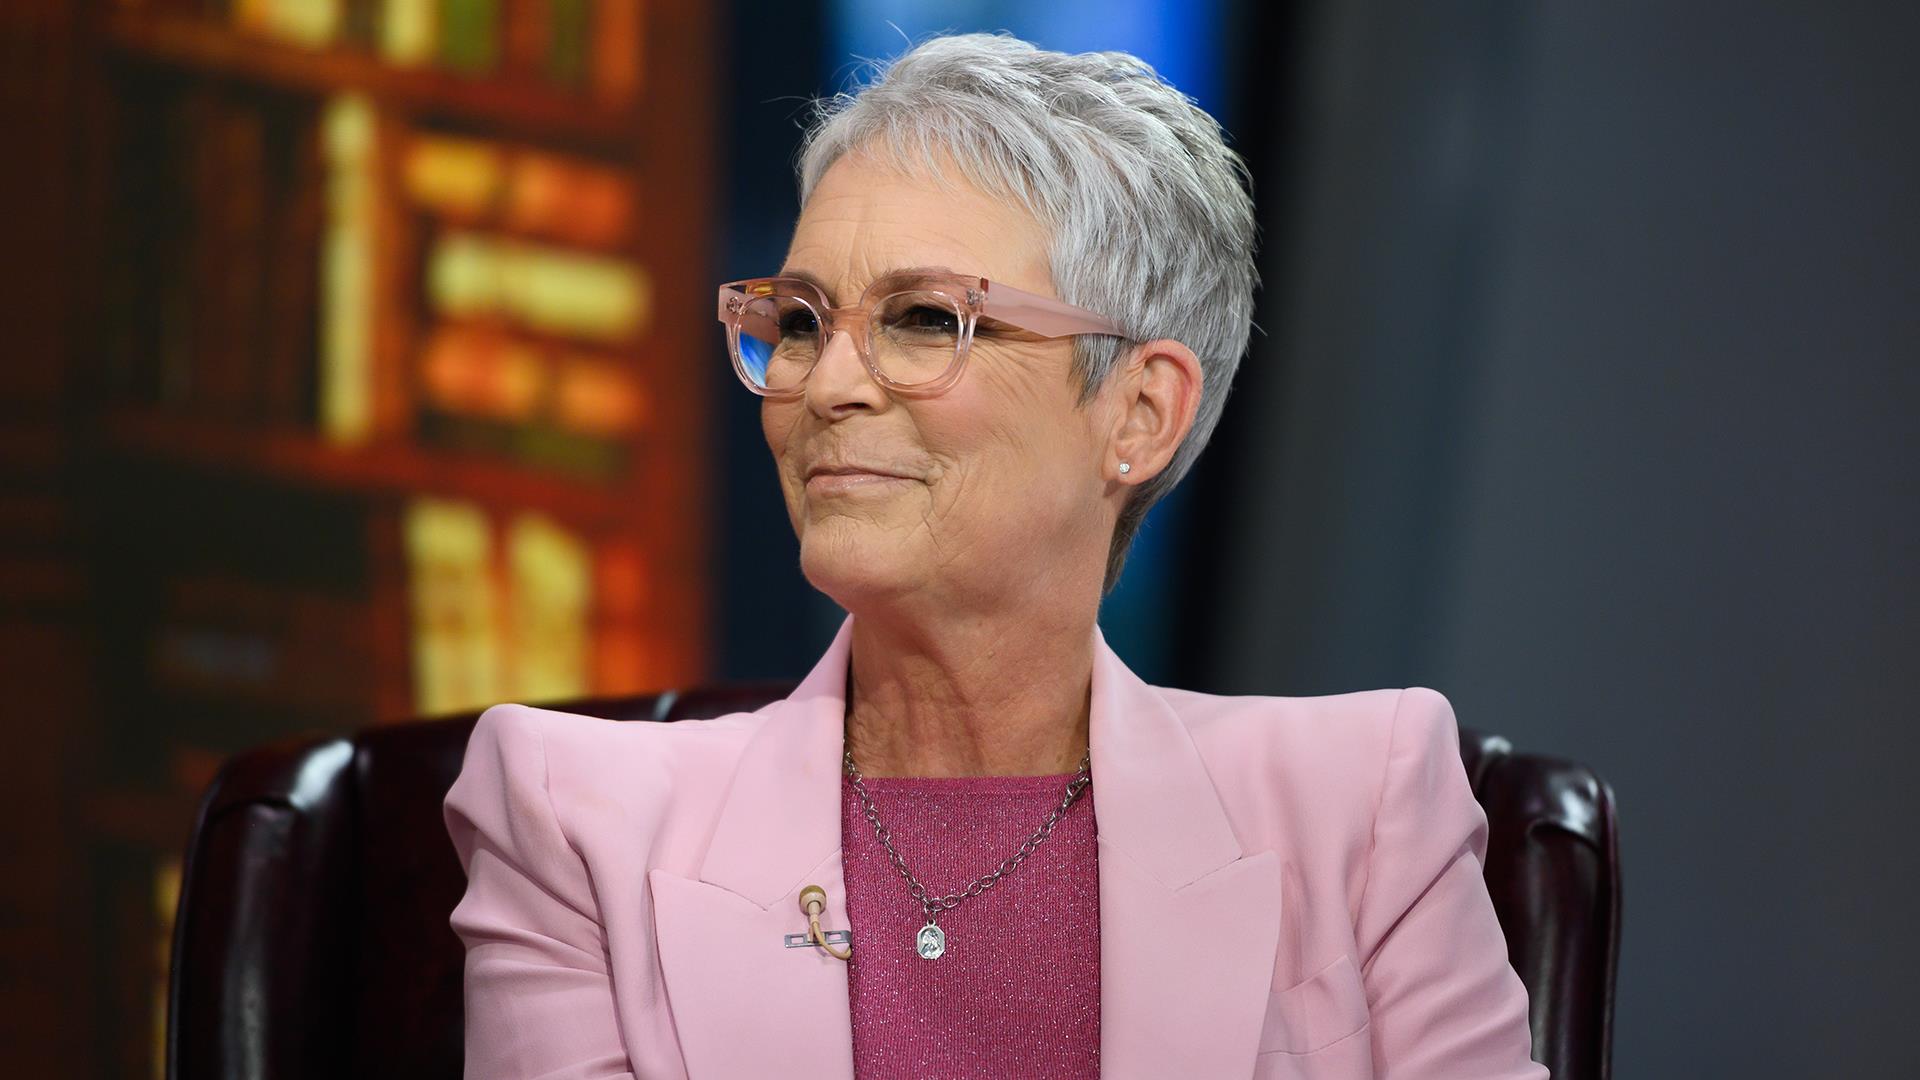 Jamie Lee Curtis on her new film 'Knives Out' and her recovery from  addiction